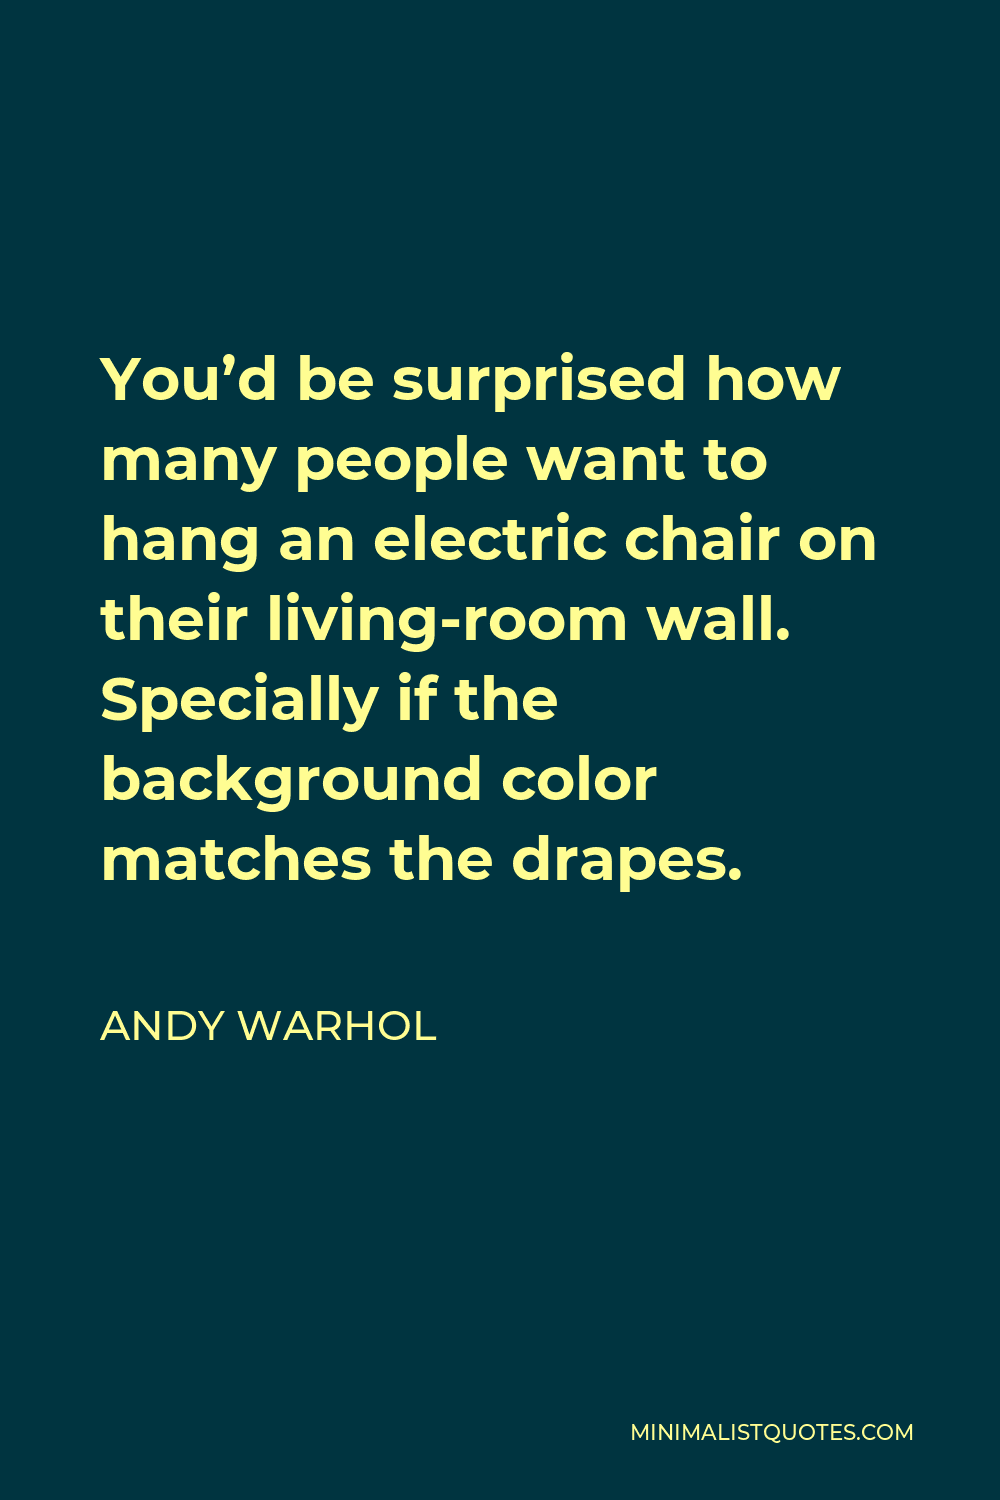 Andy Warhol Quote - You’d be surprised how many people want to hang an electric chair on their living-room wall. Specially if the background color matches the drapes.